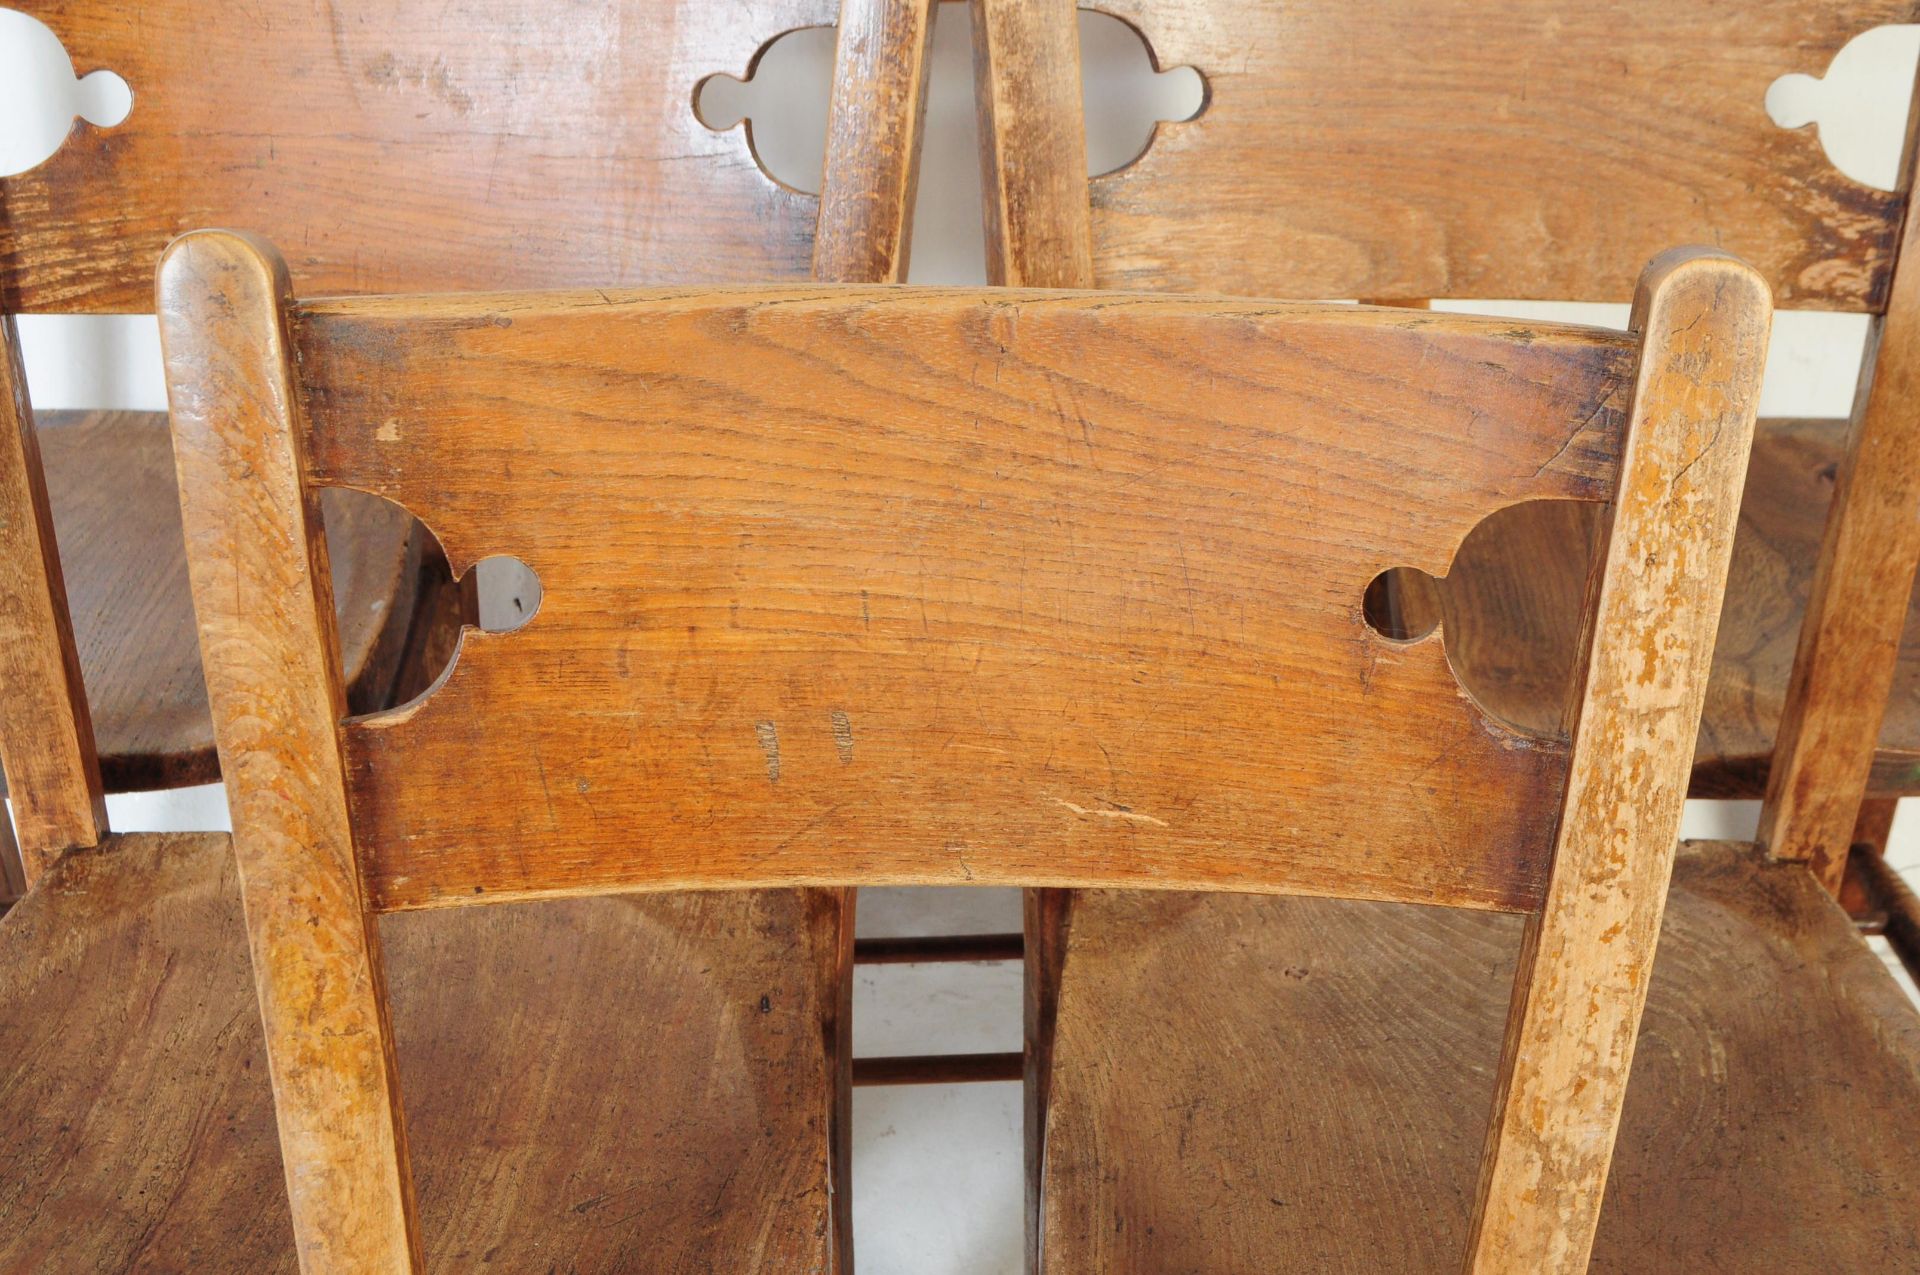 SET OF SIX EARLY 20TH CENTURY OAK CHURCH CHAIRS - Image 3 of 5